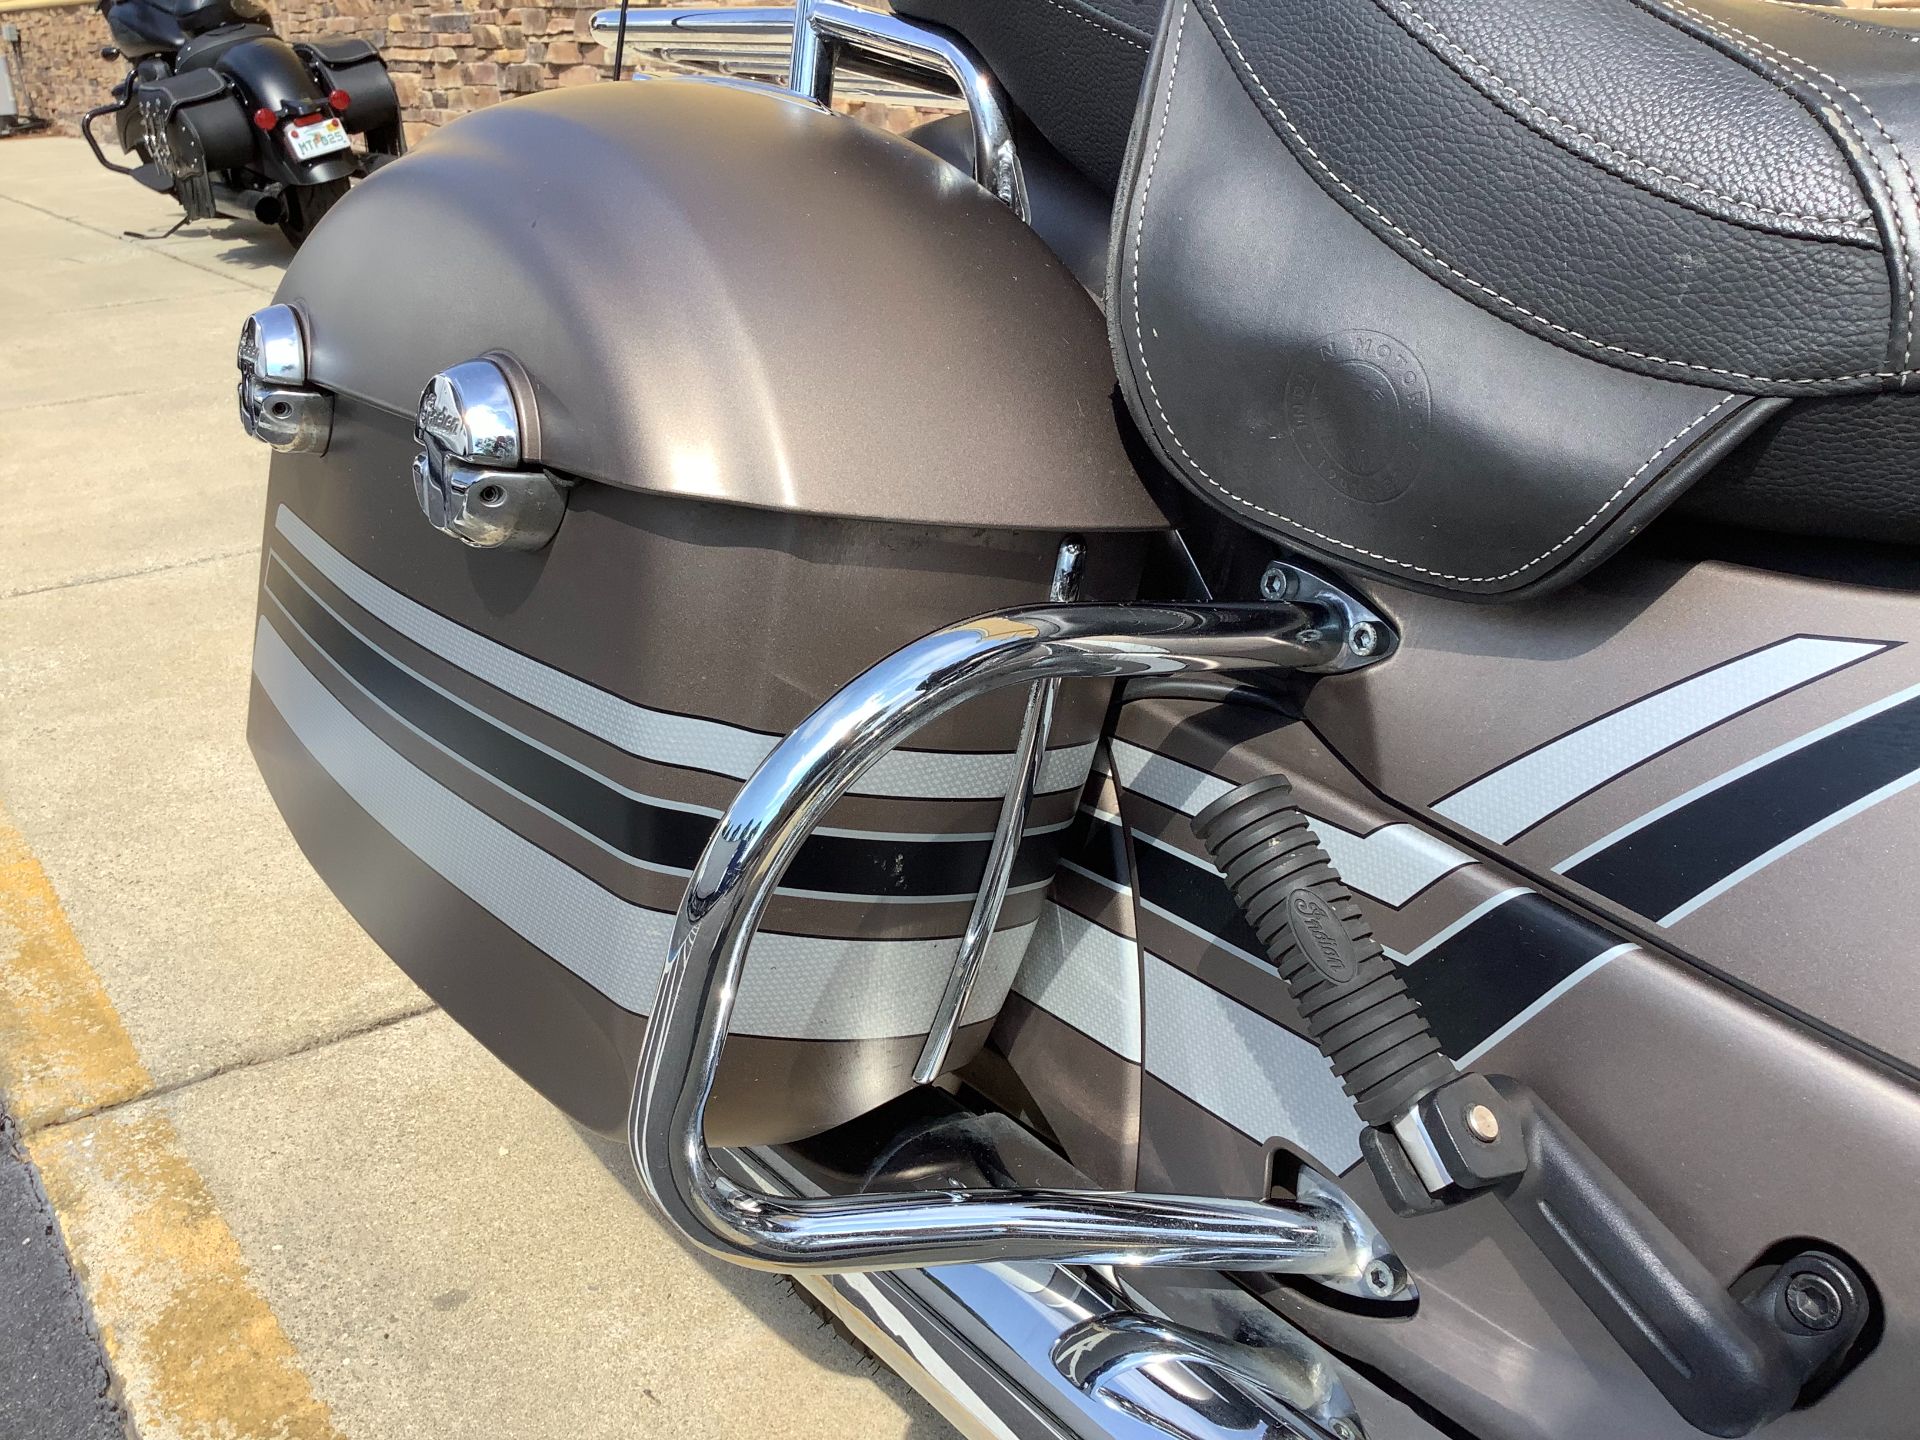 2018 Indian Motorcycle CHIEFTAIN LIMITED in Panama City Beach, Florida - Photo 11